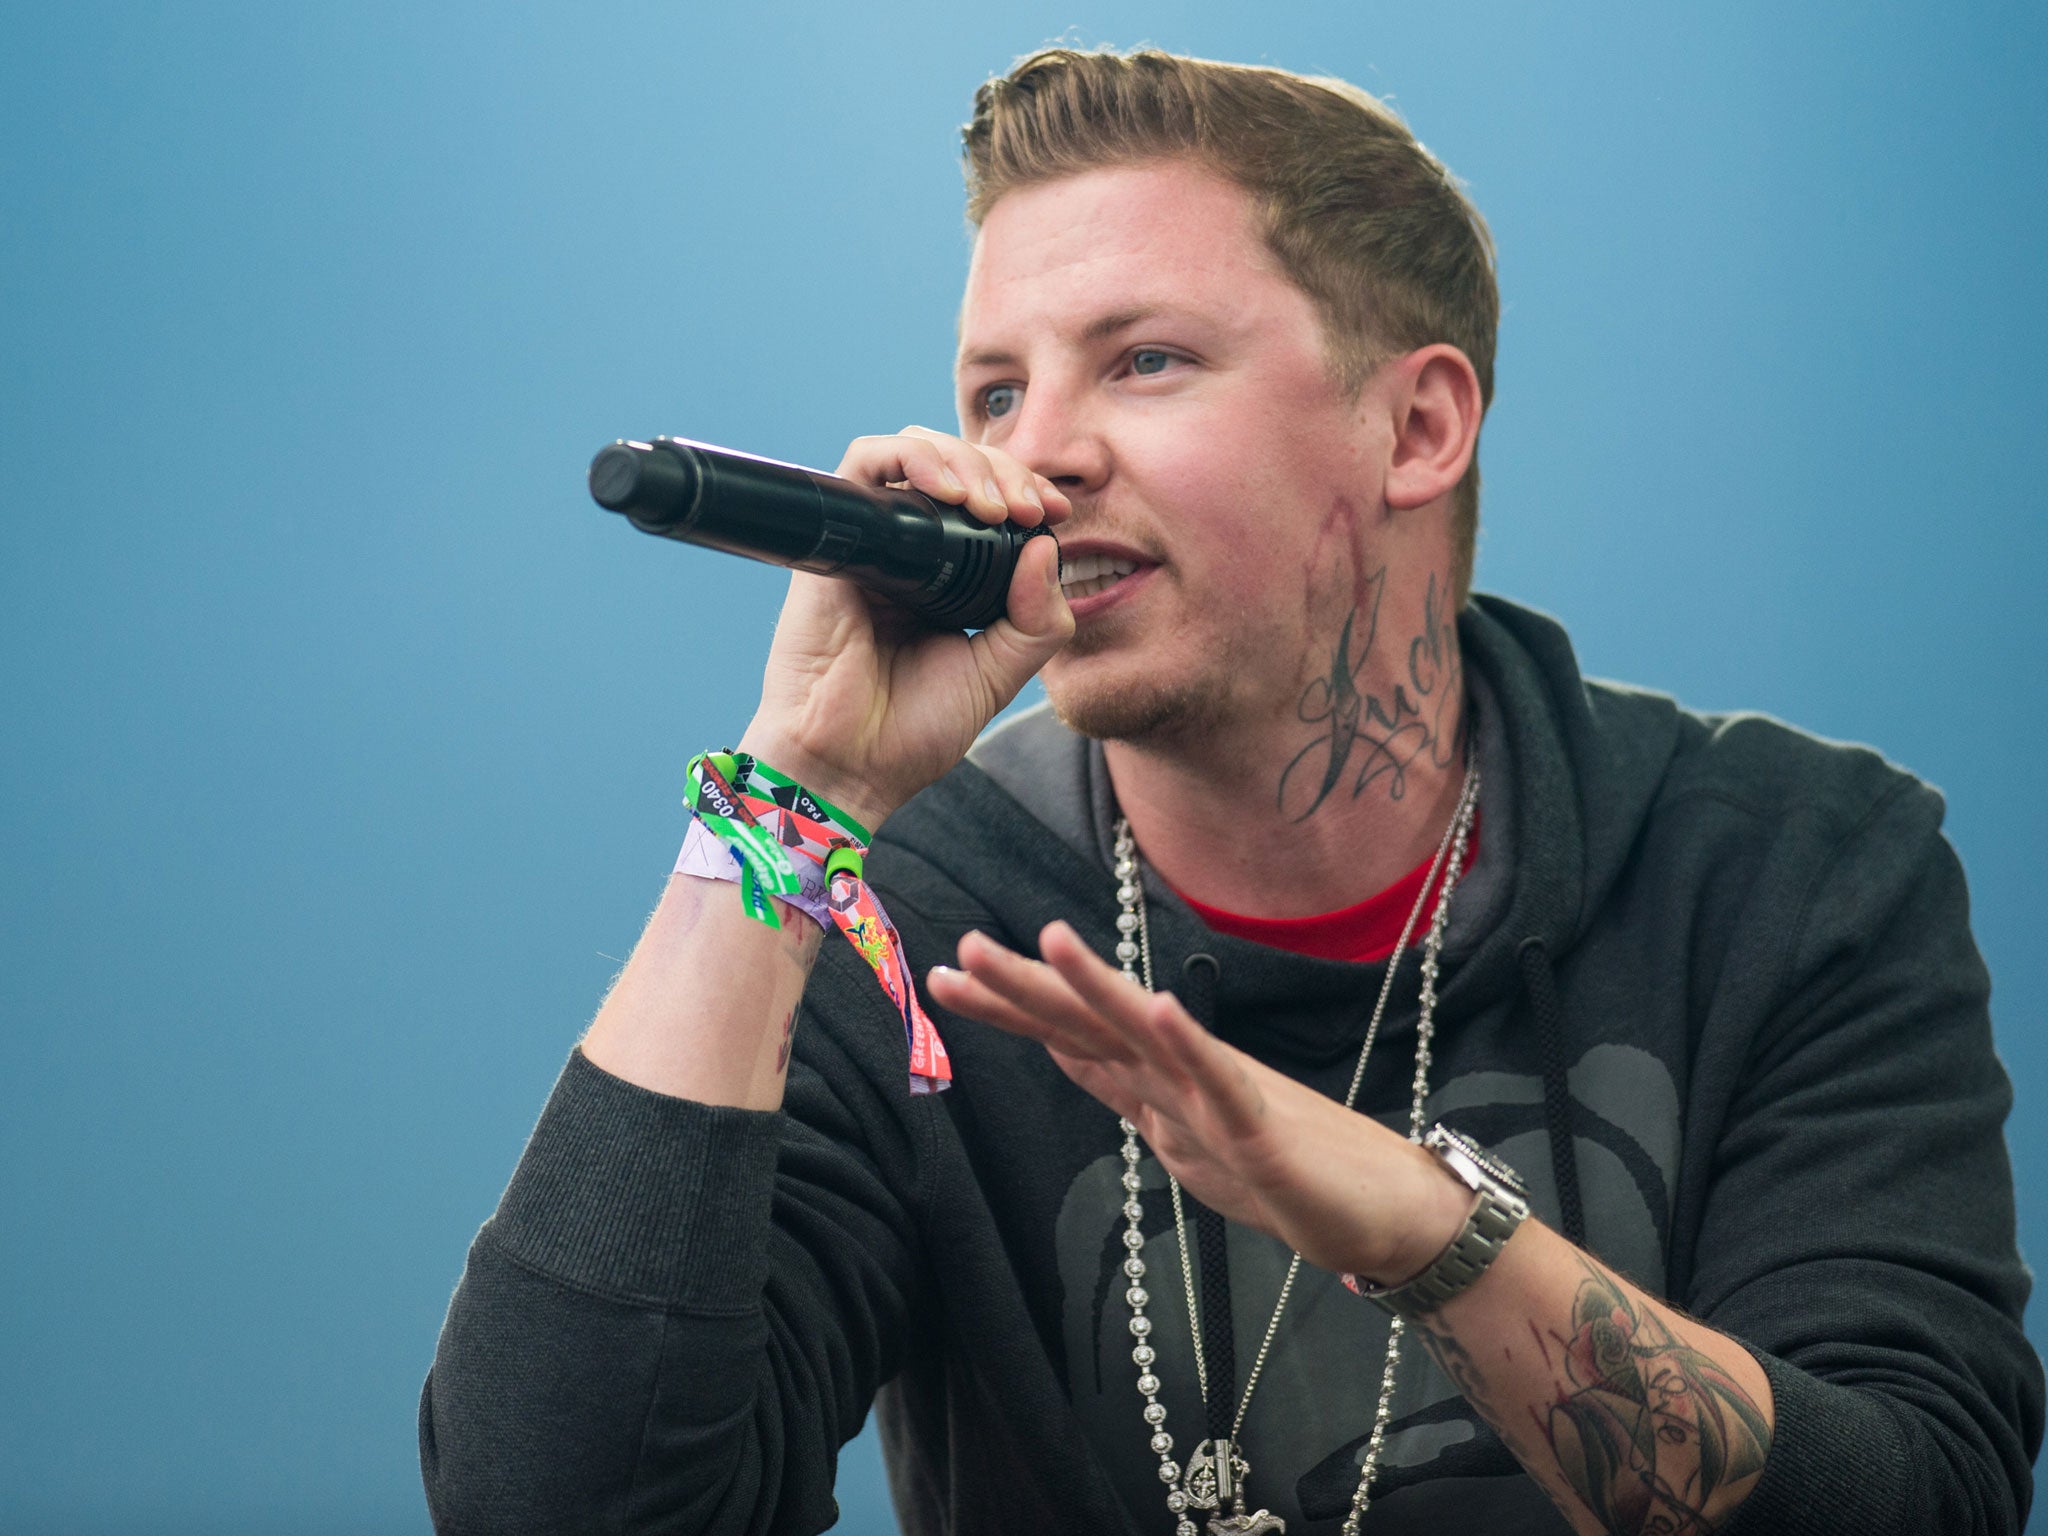 Professor Green, seen here performing at this year's Glastonbury Festival, has been arrested on suspicion of drink-driving